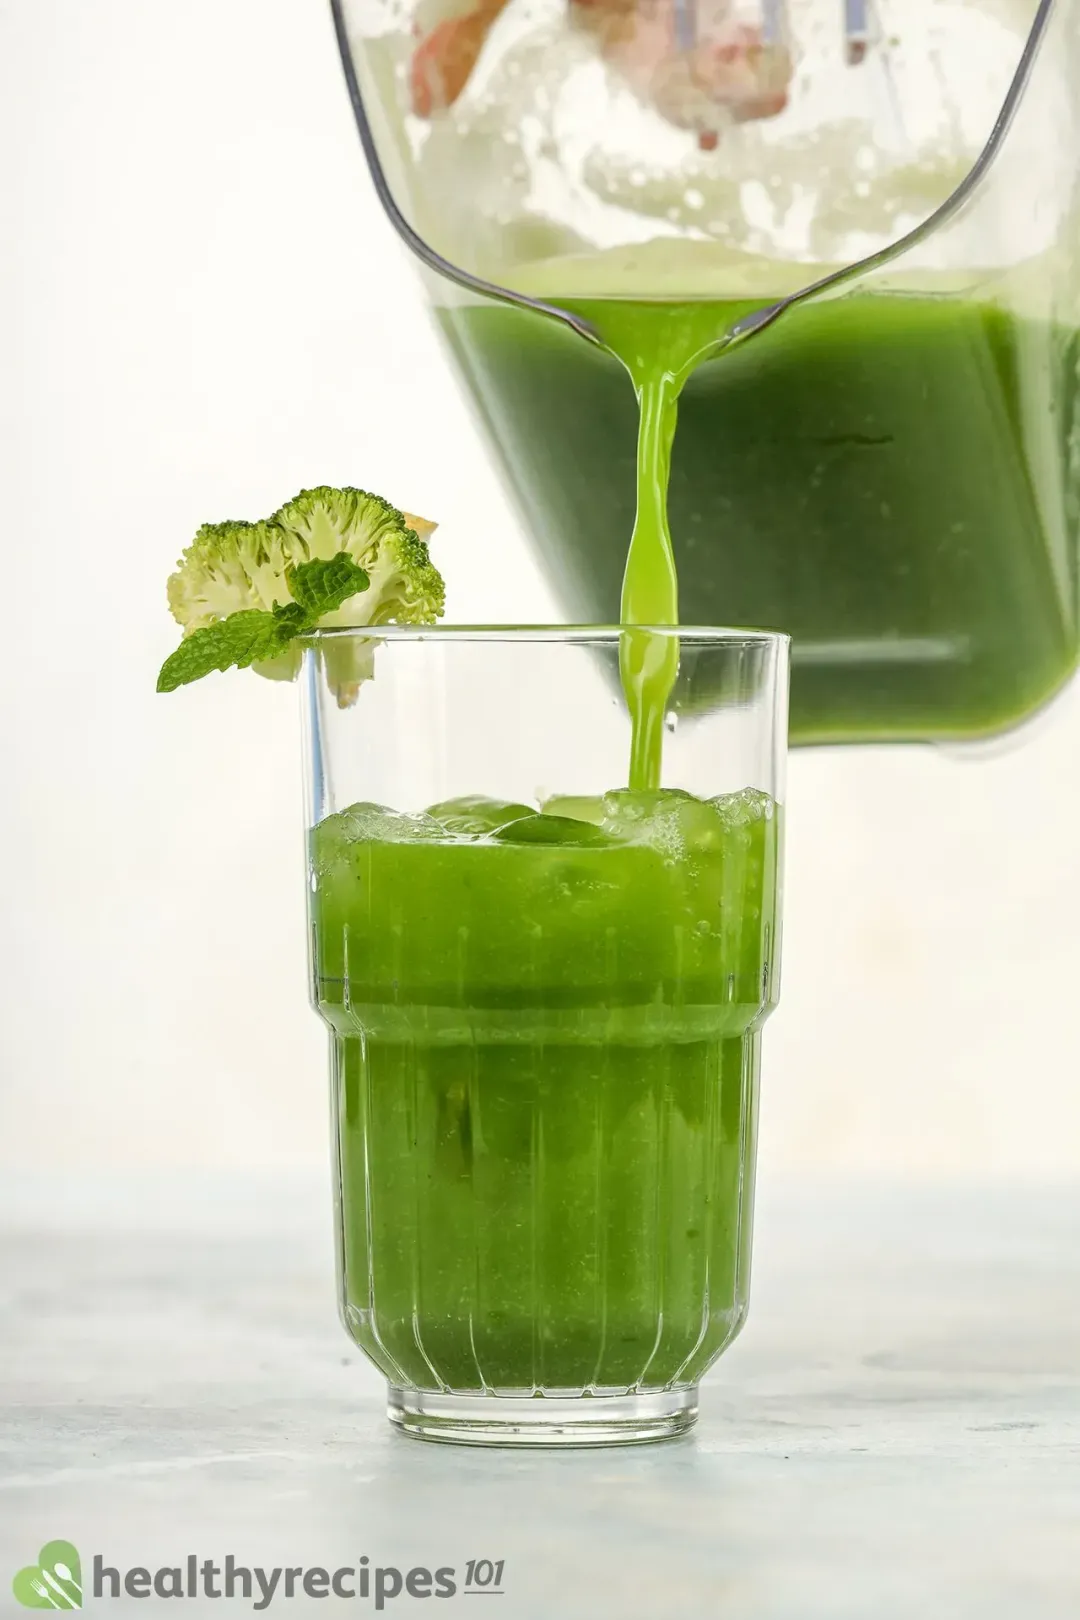 A glass of broccoli juice drink poured from a pitcher above it